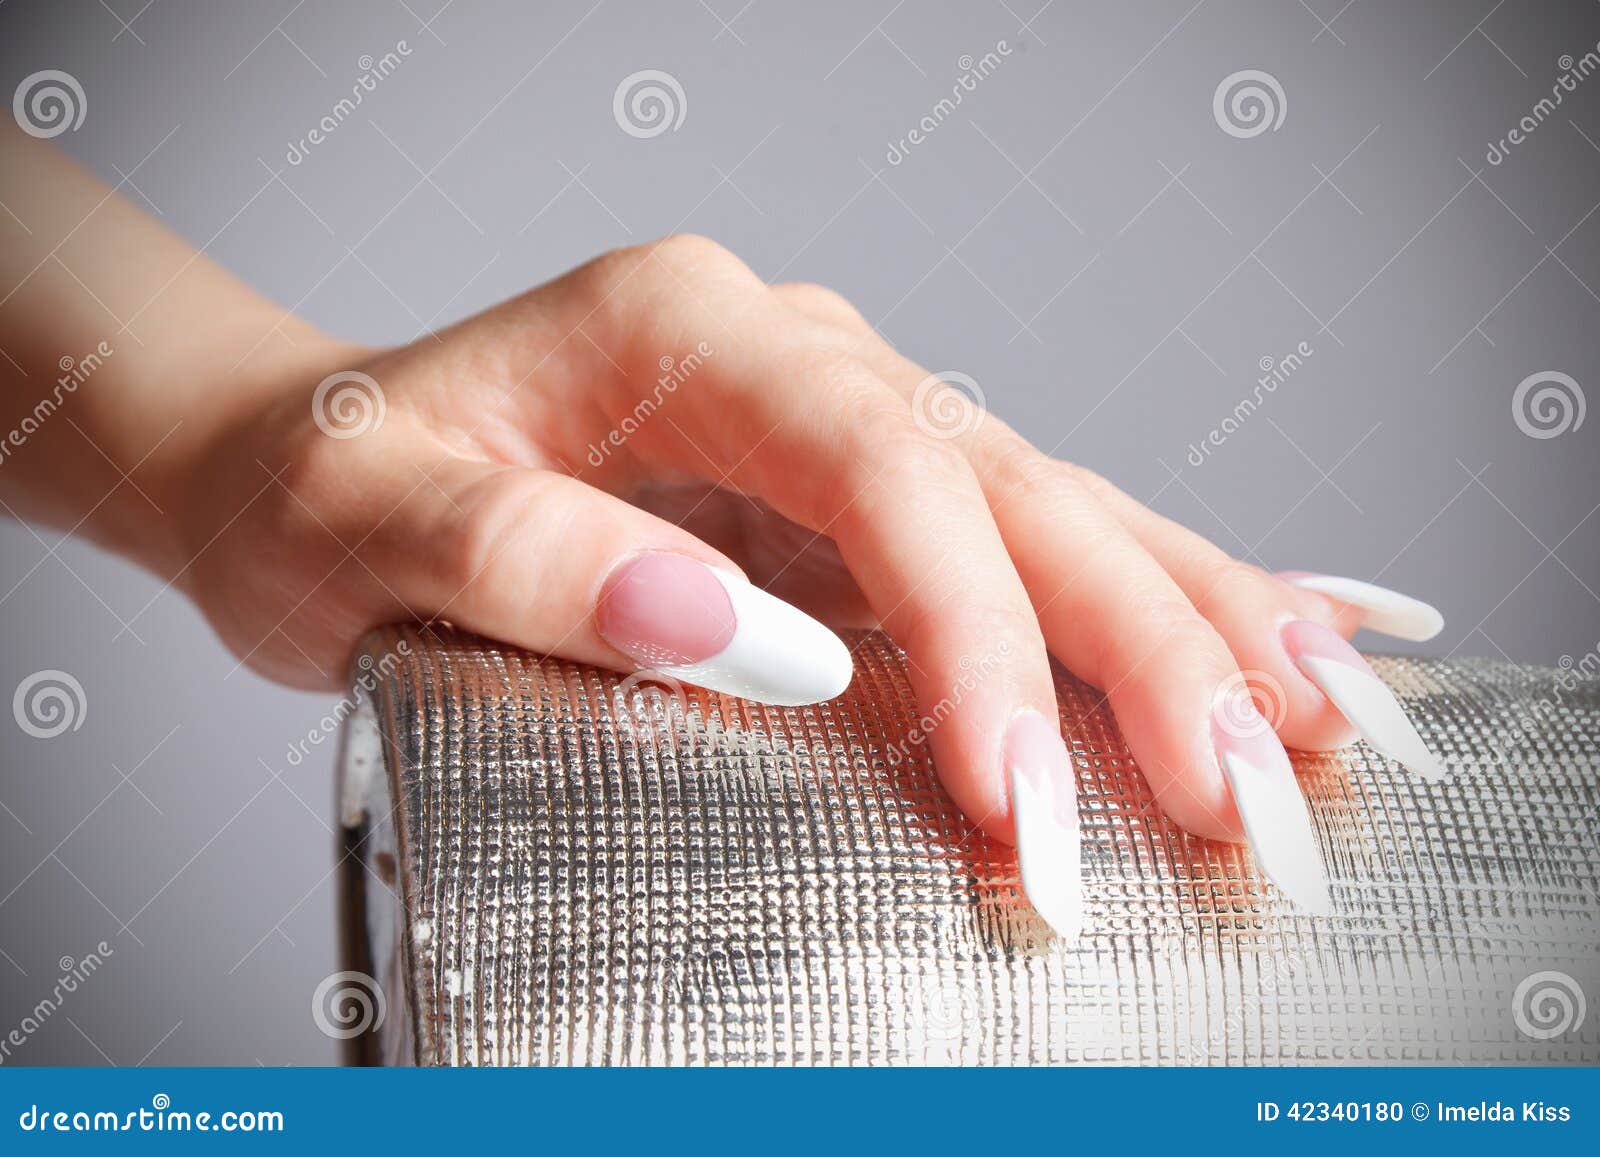 close-up portrait of female hand with manicured fashion nails